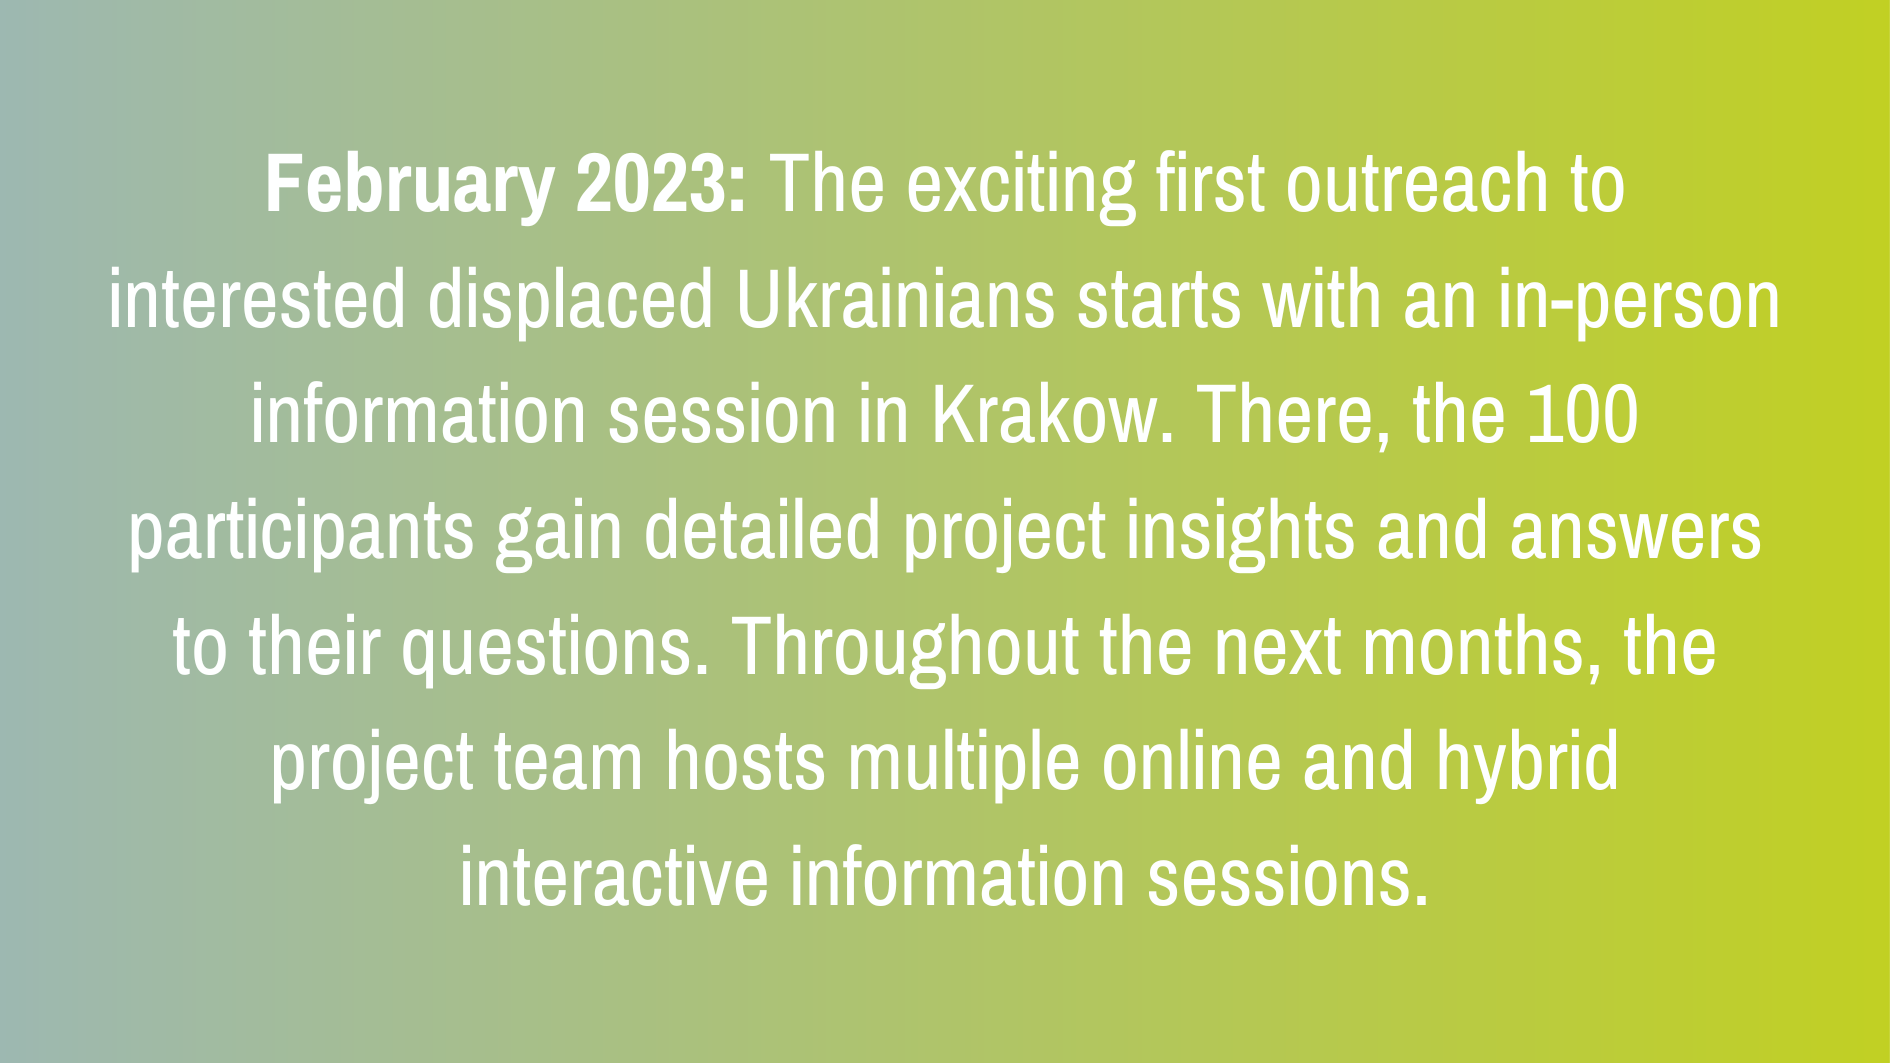 February 2023: The exciting first outreach to interested displaced Ukrainians starts with an in-person information session in Krakow. There, the 100 participants gain detailed project insights and answers to their questions. Throughout the next months, the project team hosts multiple online and hybrid interactive information sessions.